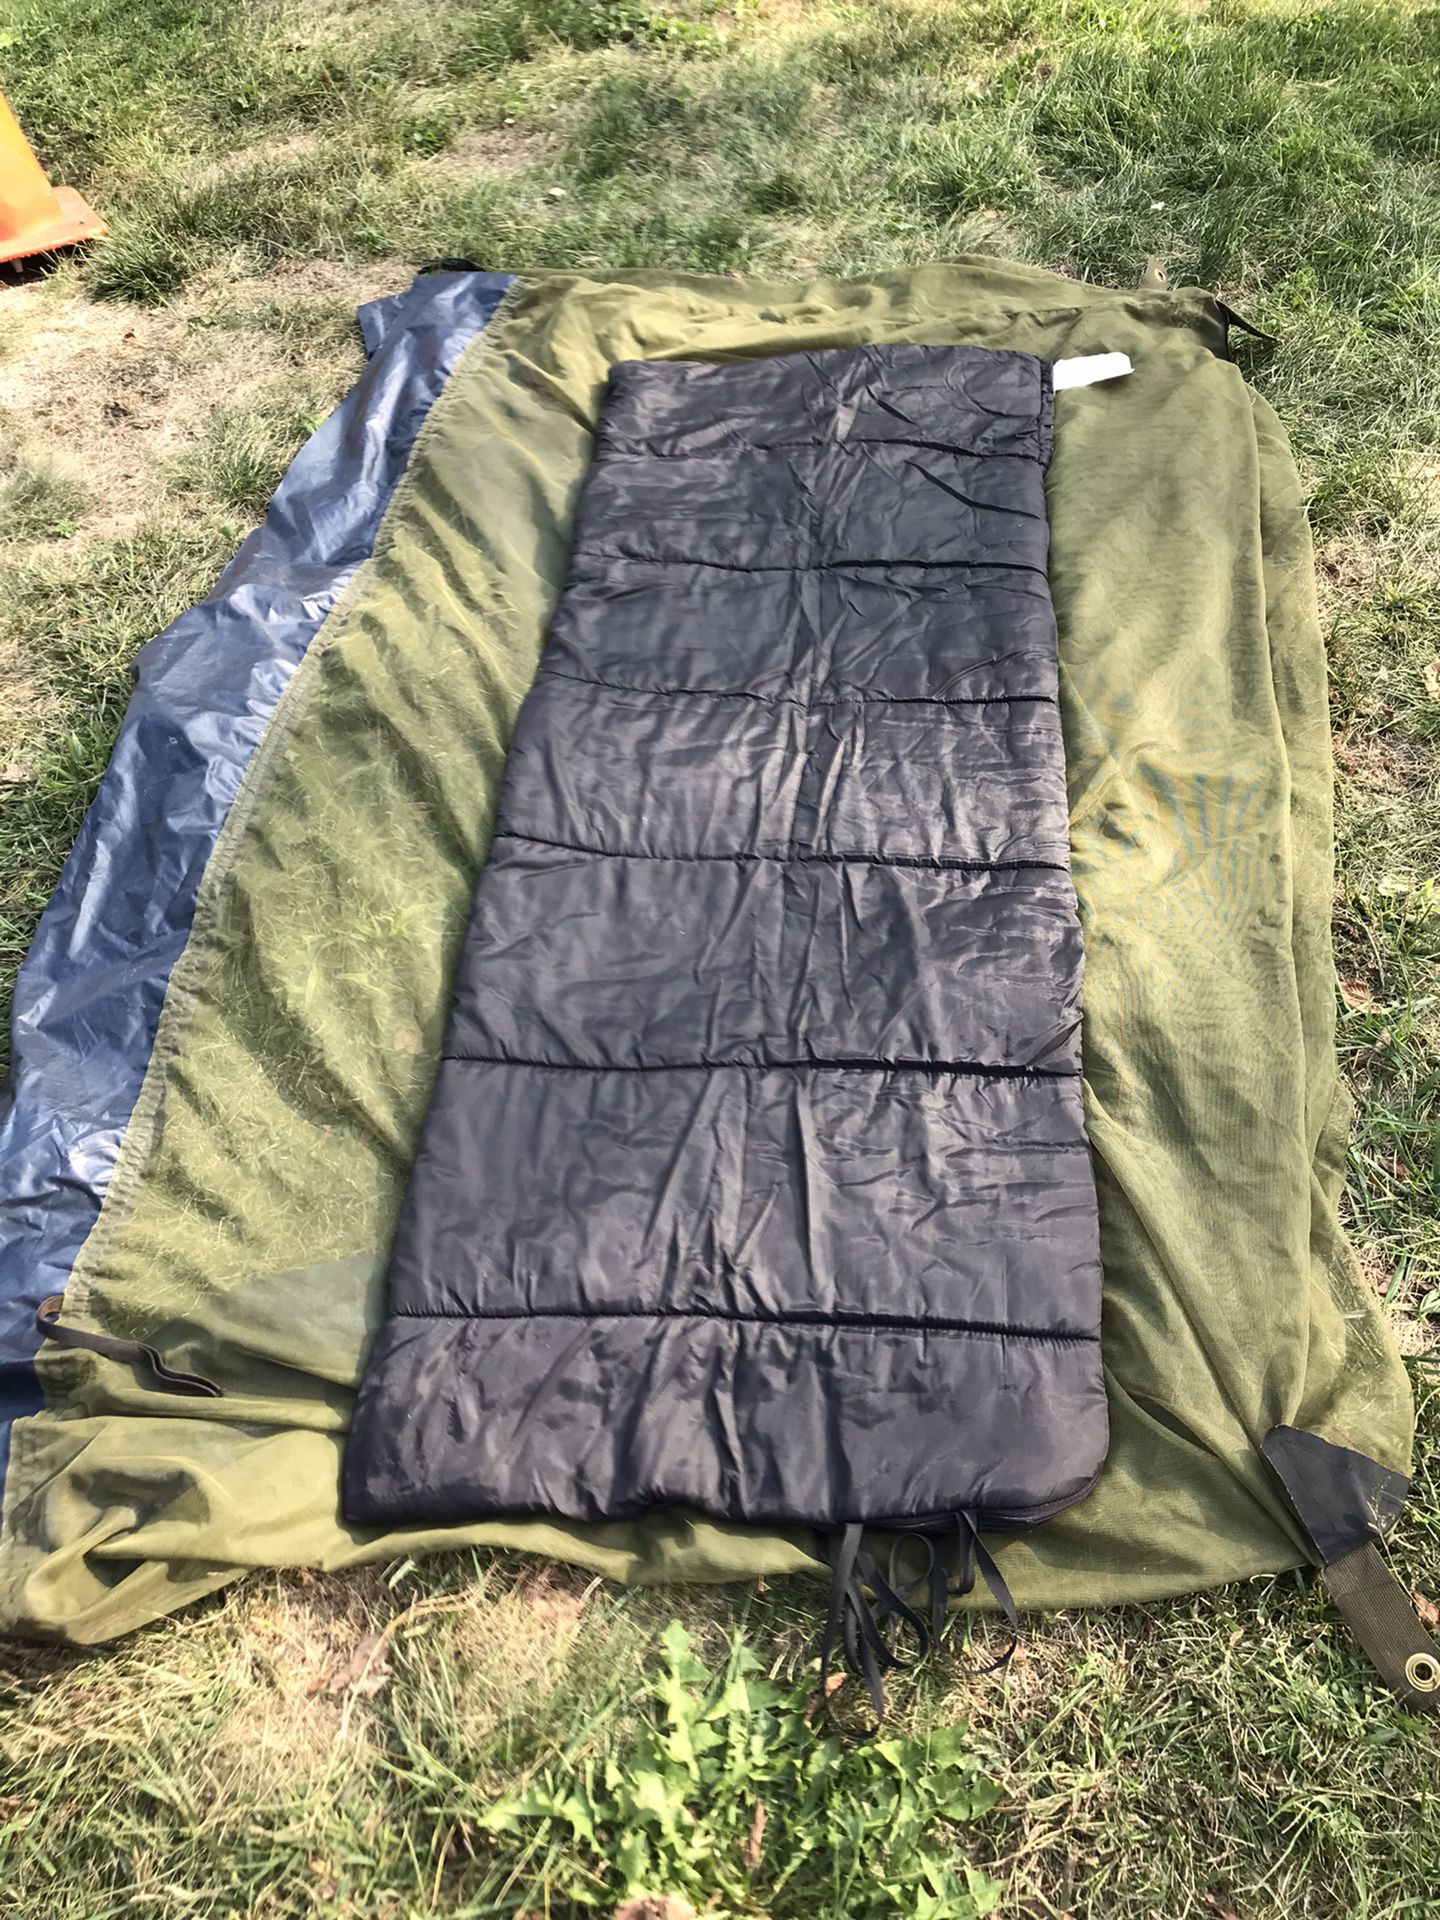 Mosquito netting personal tent OR sleeping bag